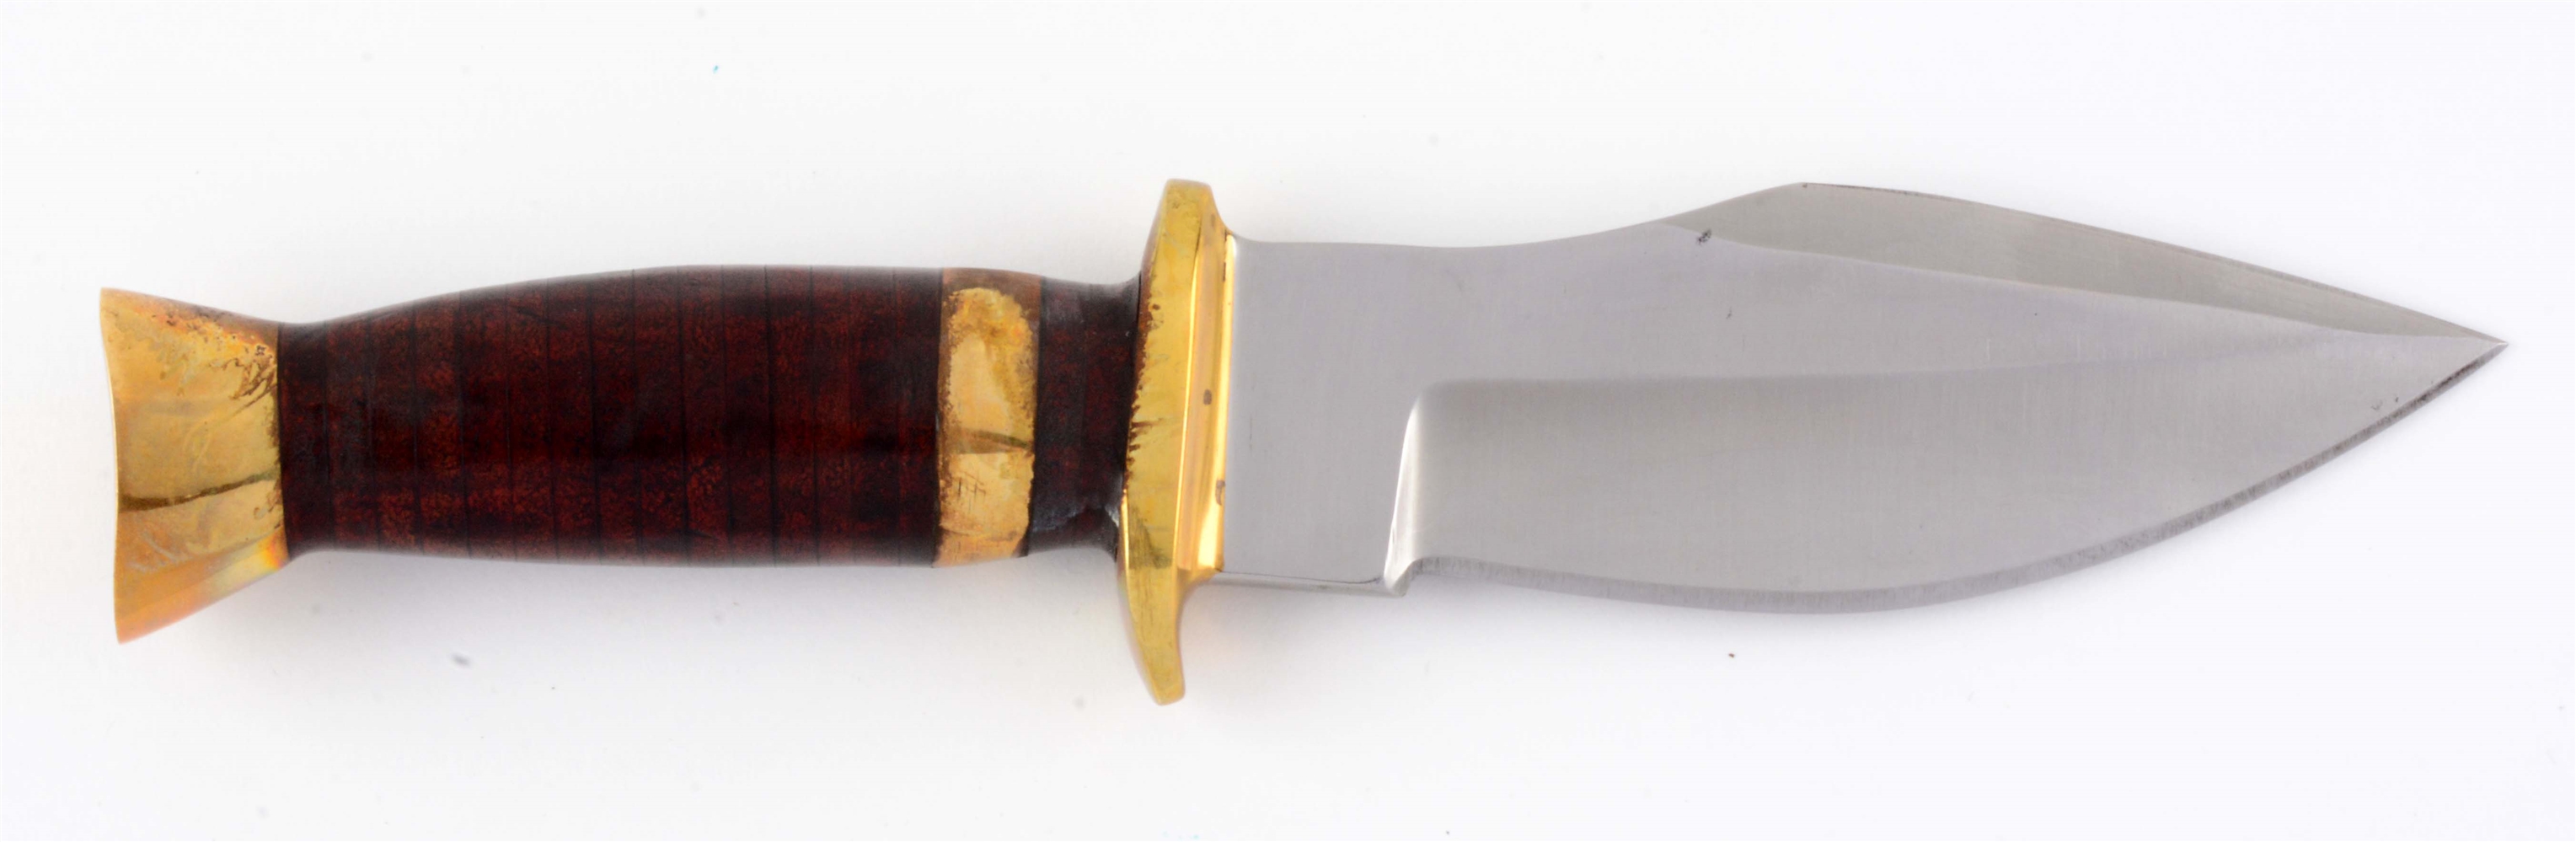 J.N. COOPER ONE OF A KIND LARGED FIXED BLADE SKINNER. 